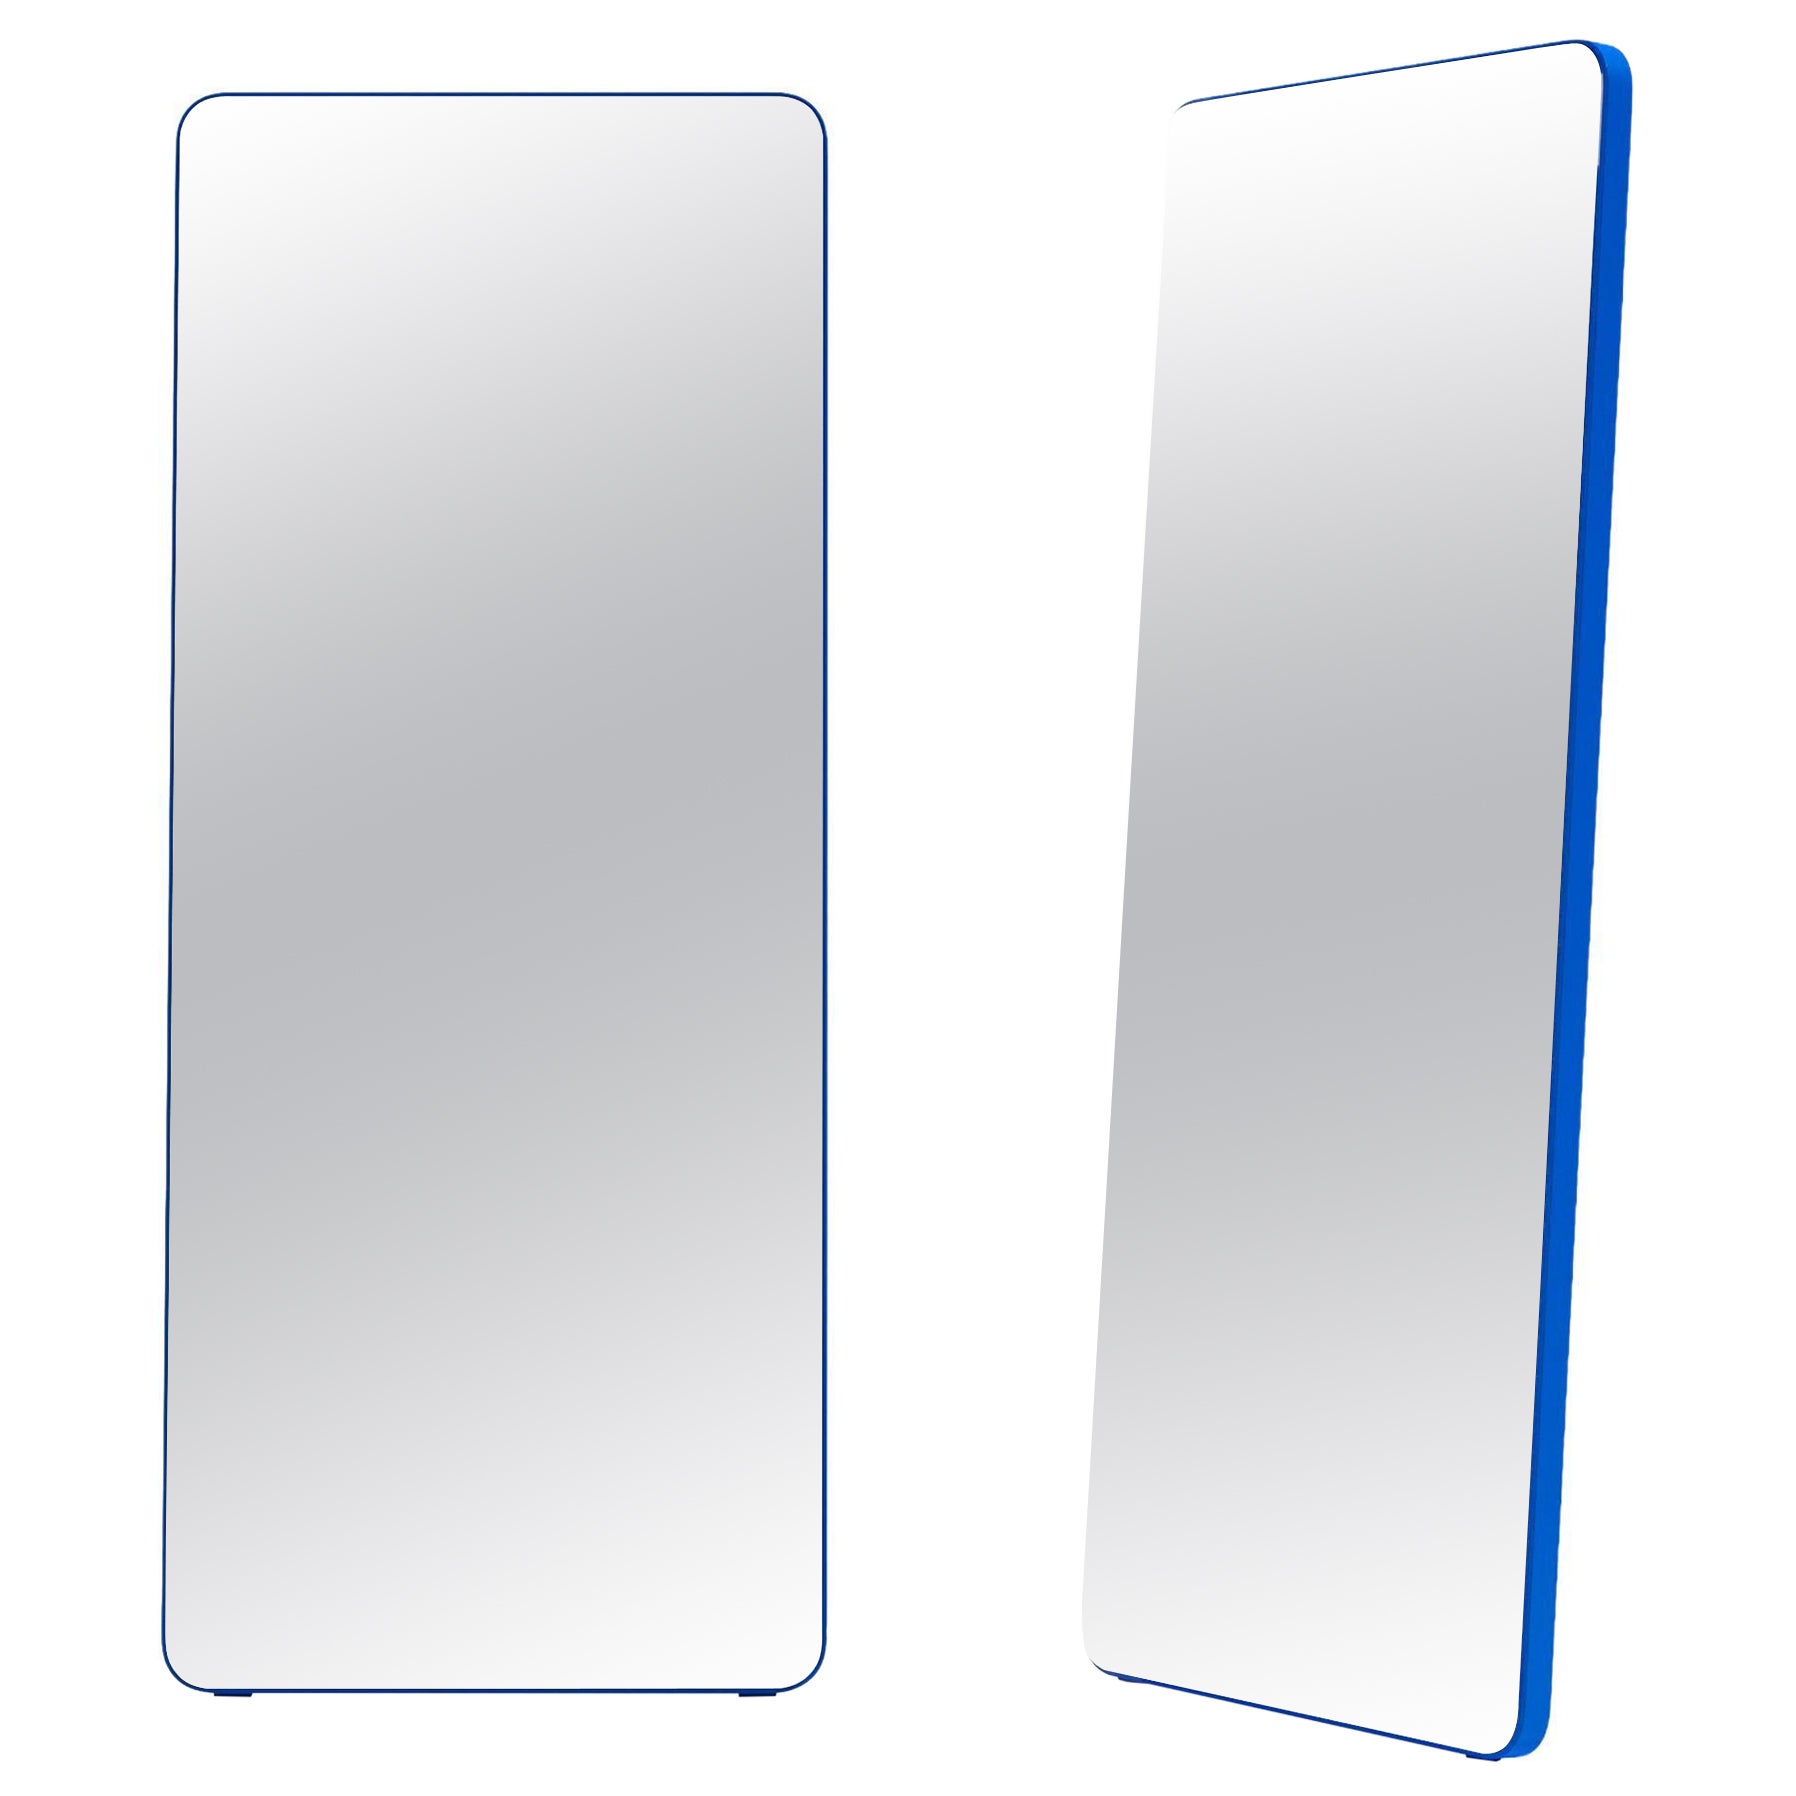 "Square Mirror" Full Length Mirror (any color) by Oitoproducts